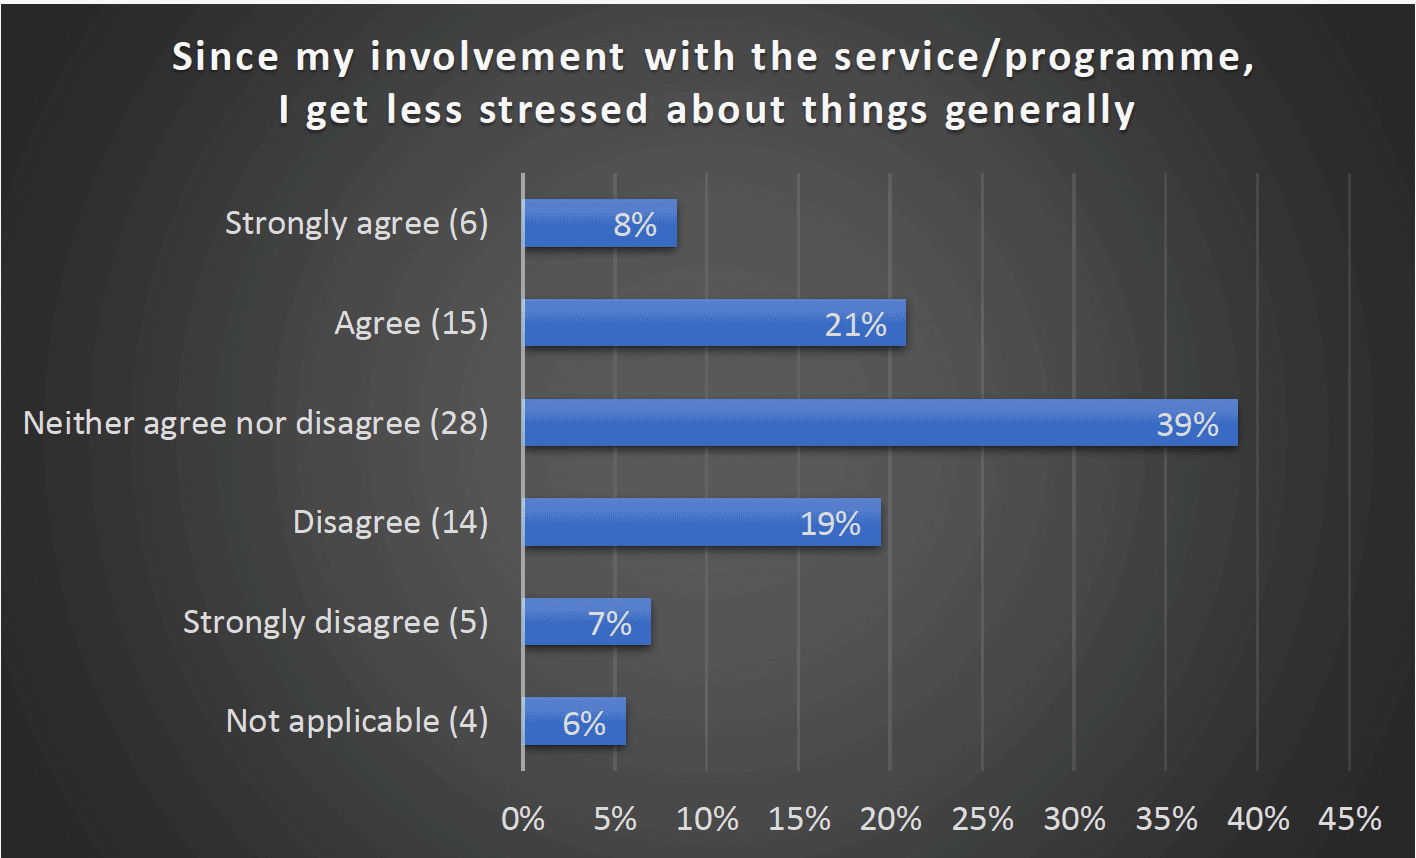 Since my involvement with the service/programme, I get less stressed about things generally - Strongly agree (6) 8%, Agree (15) 21, Neither agree nor disagree (28) 39%, Disagree (14) 19%, Strongly disagree (5) 7%, Not applicable (4) 6%